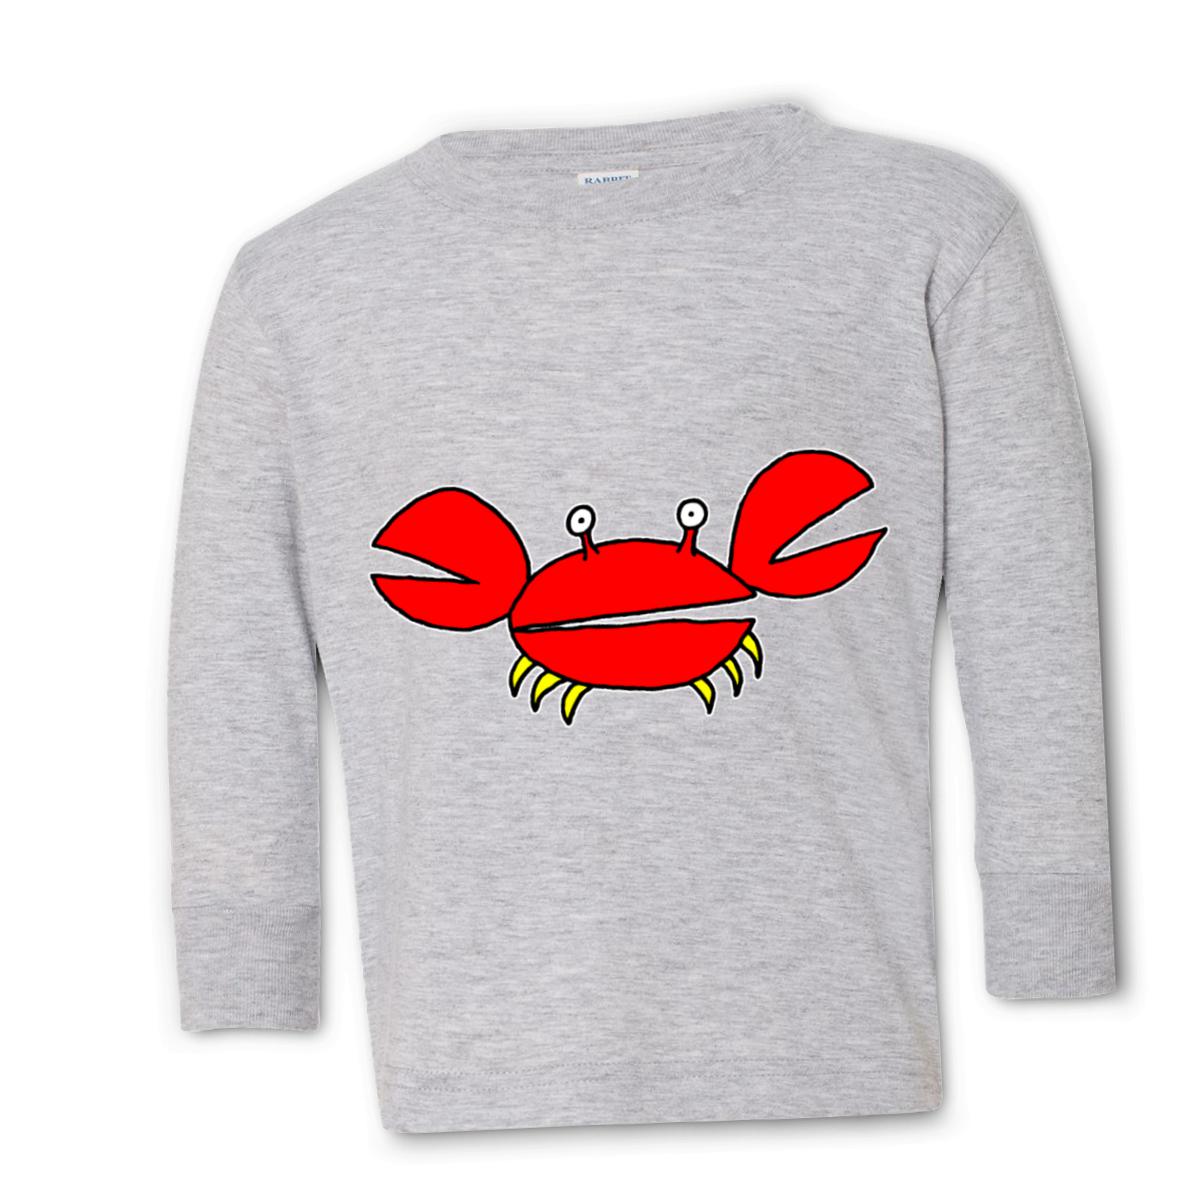 Crab Toddler Long Sleeve Tee 4T heather